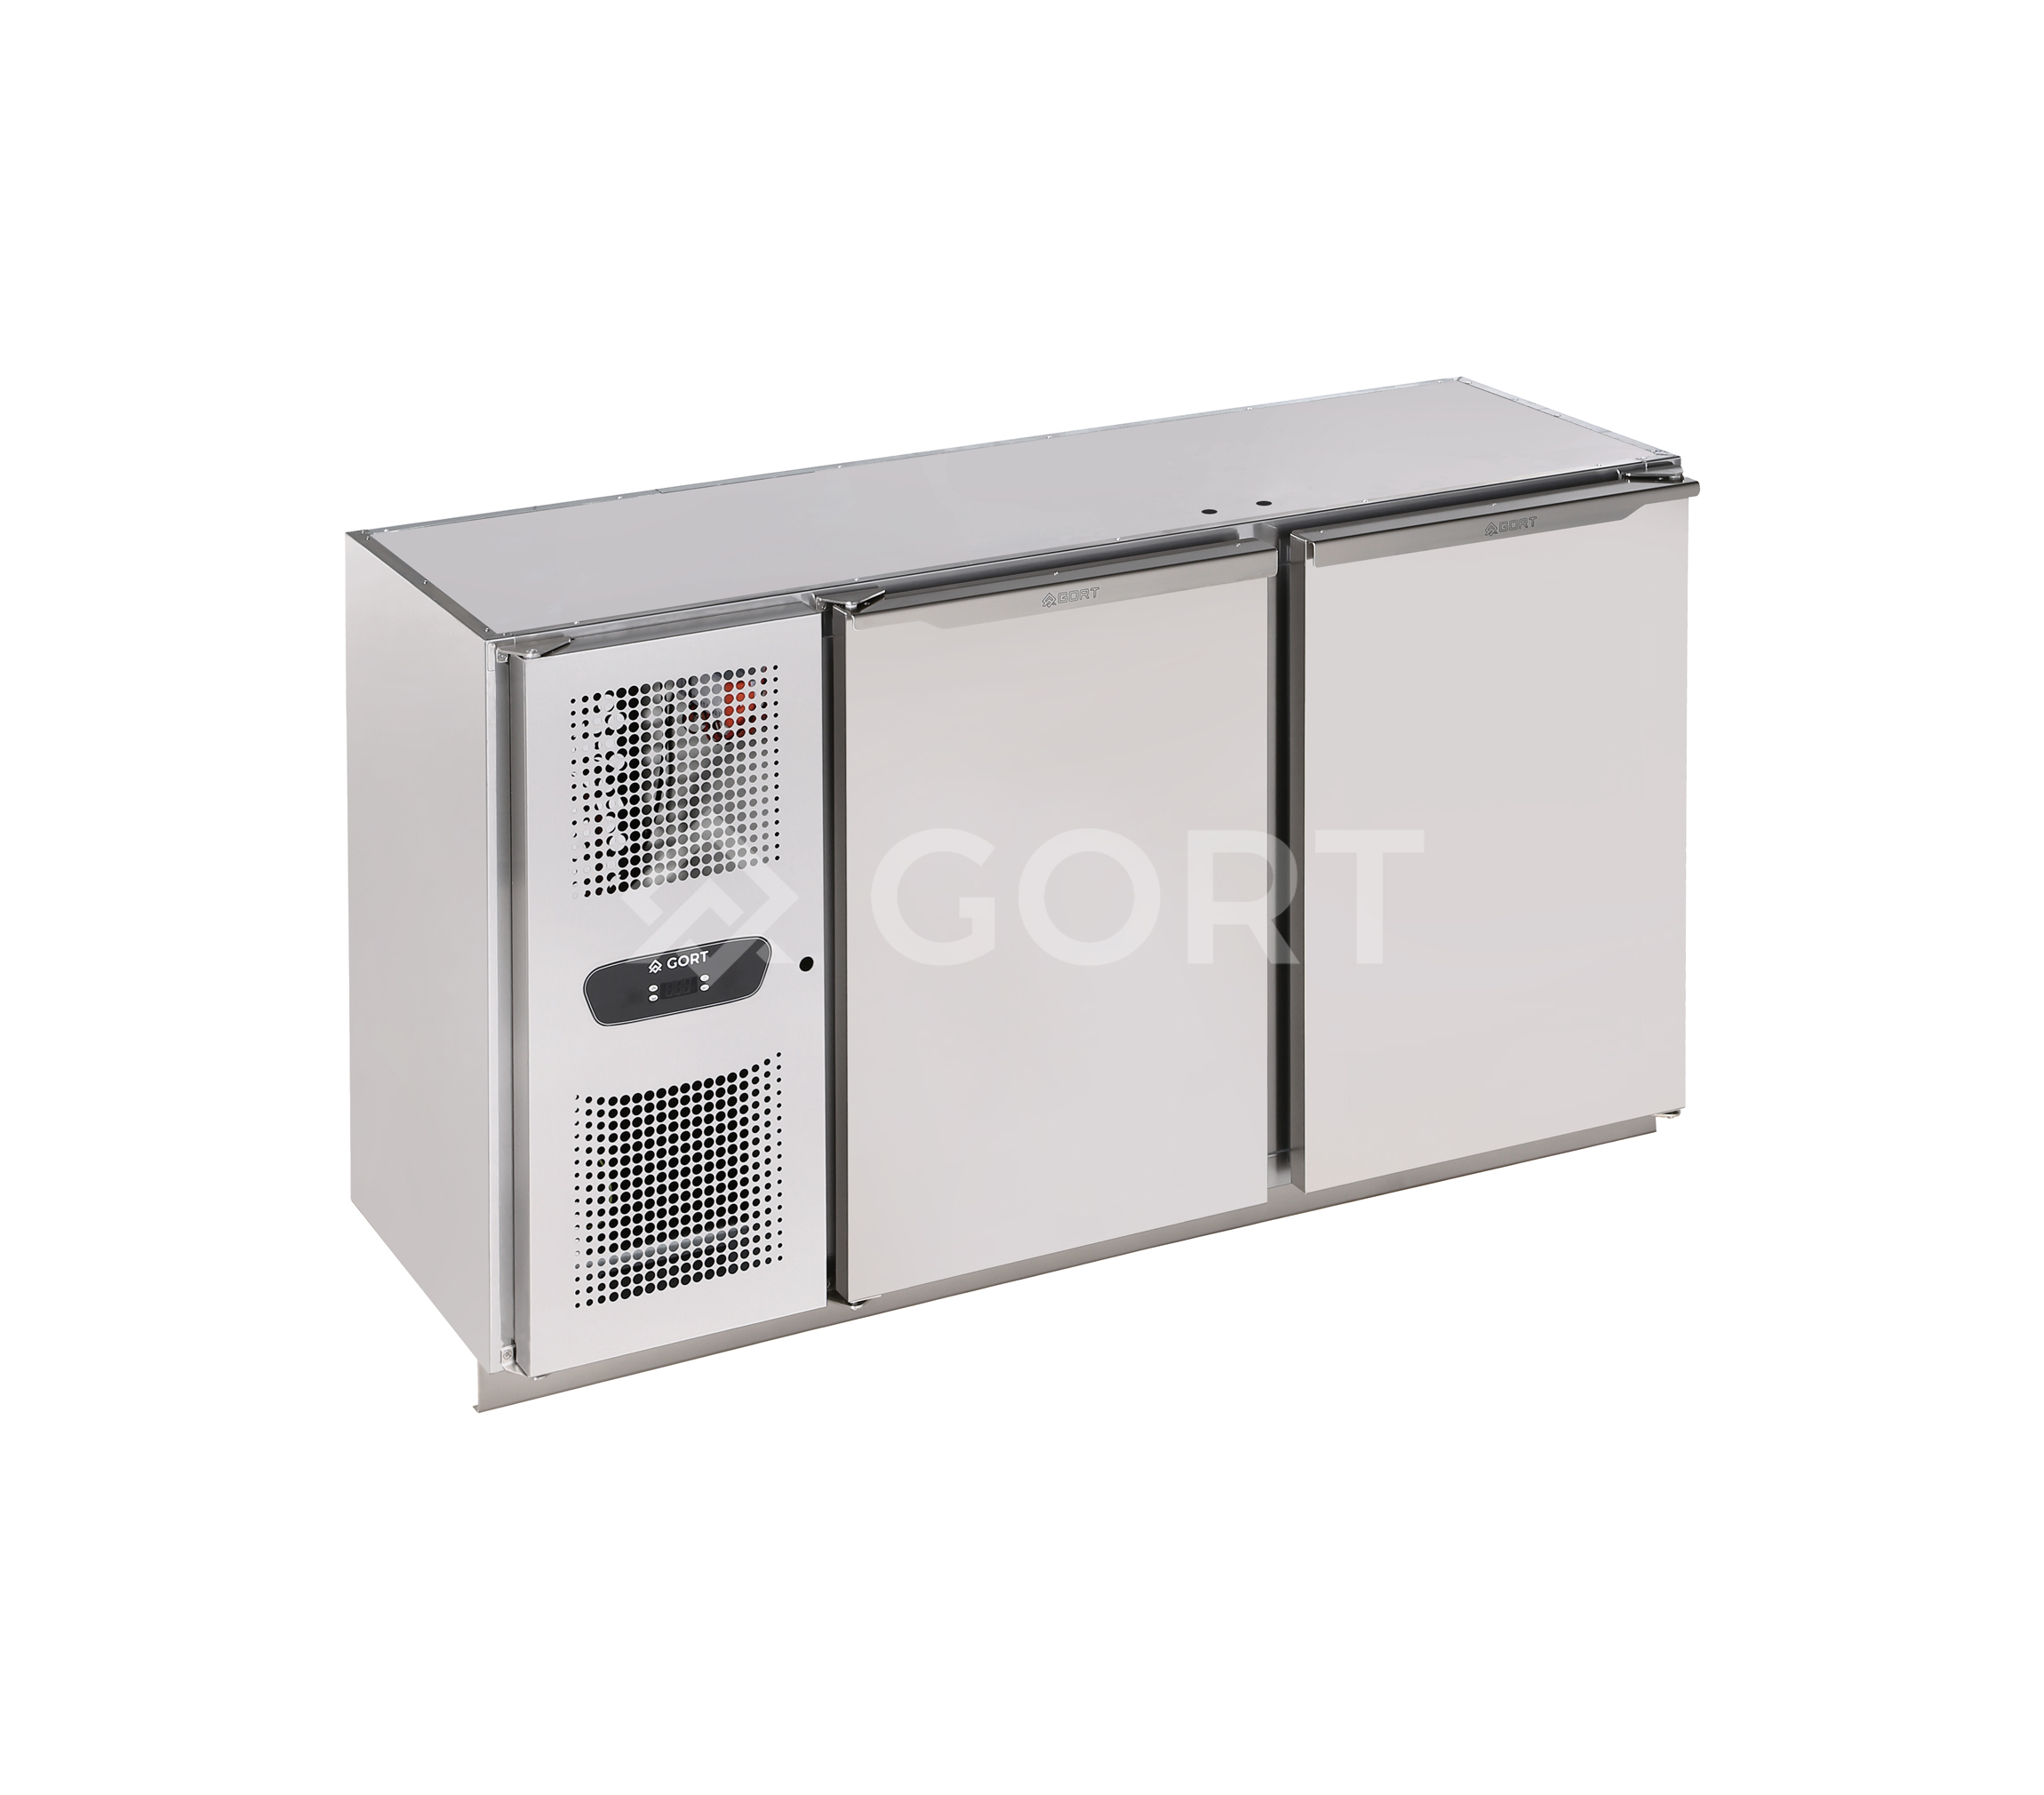 BAR COUNTER REFRIGERATOR with 2 s/s doors – compressor on the side